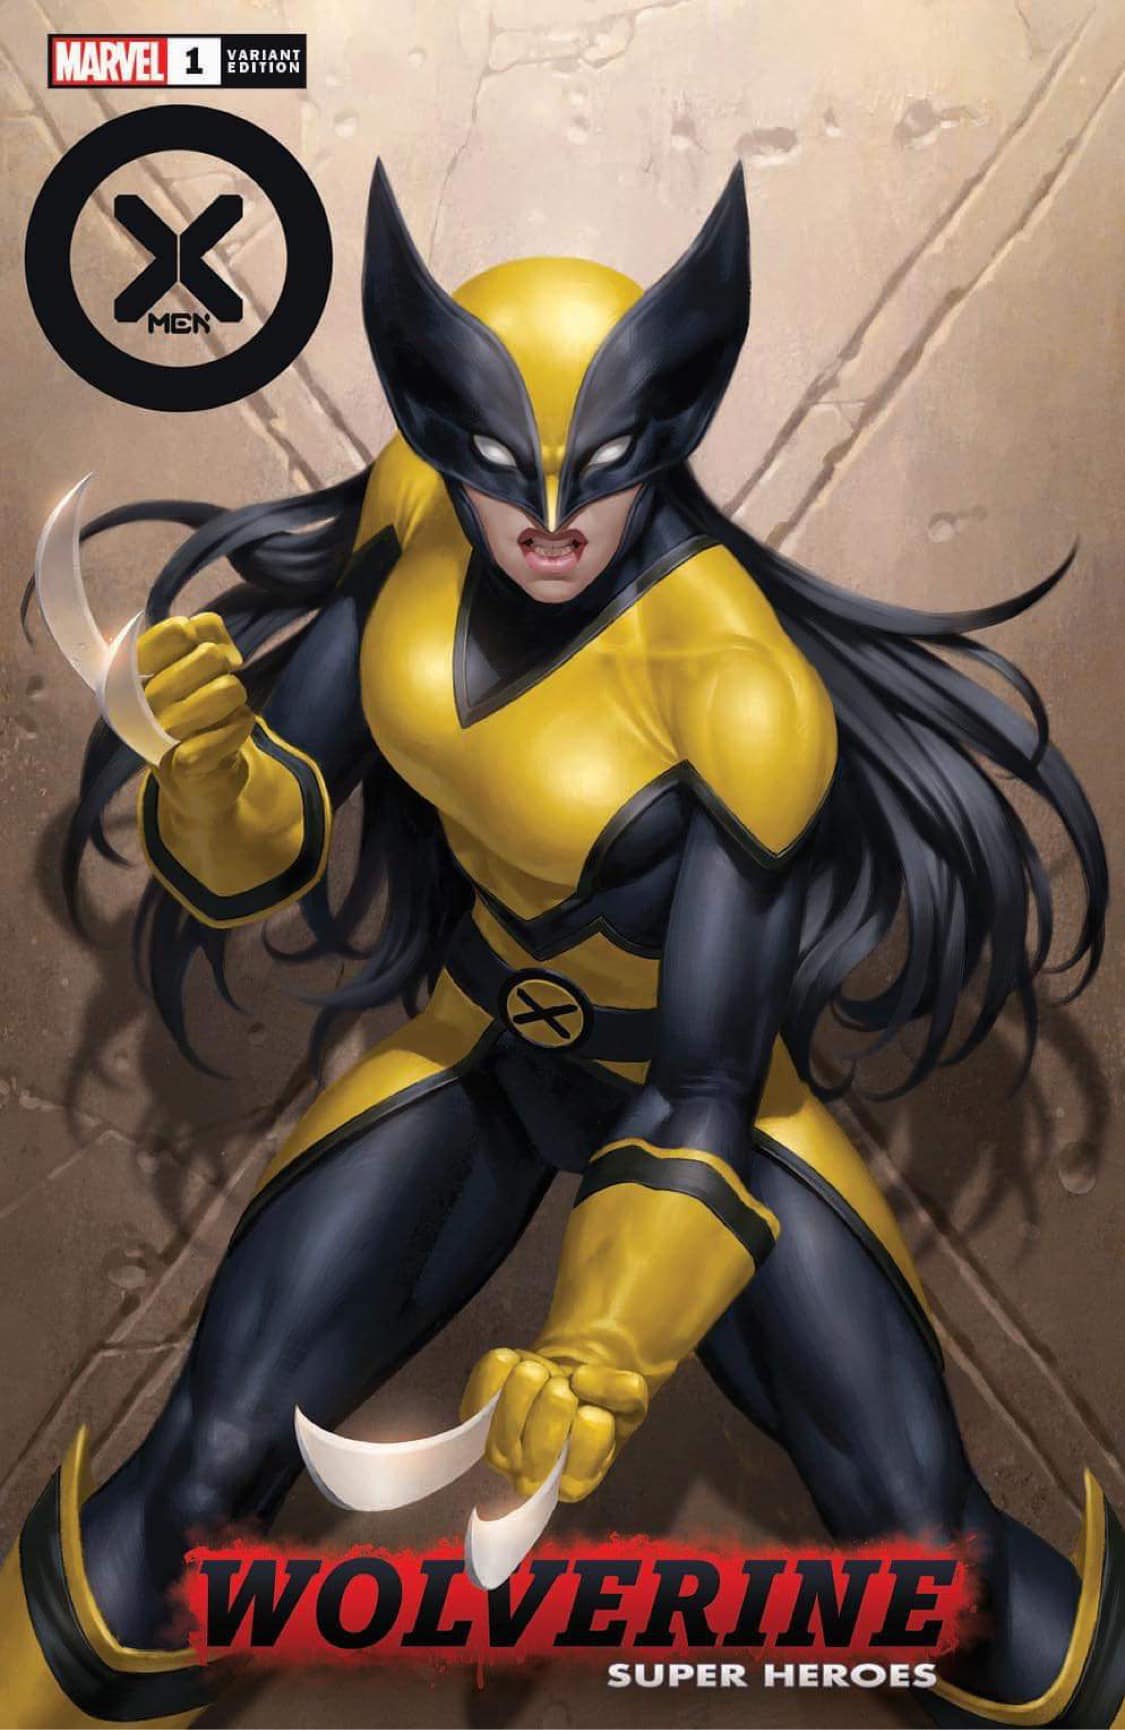 X-MEN #1 JUNGGEUN YOON WOLVERINE X-23 TRADING CARD VARIANT LIMITED TO 800 COPIES WITH NUMBERED COA